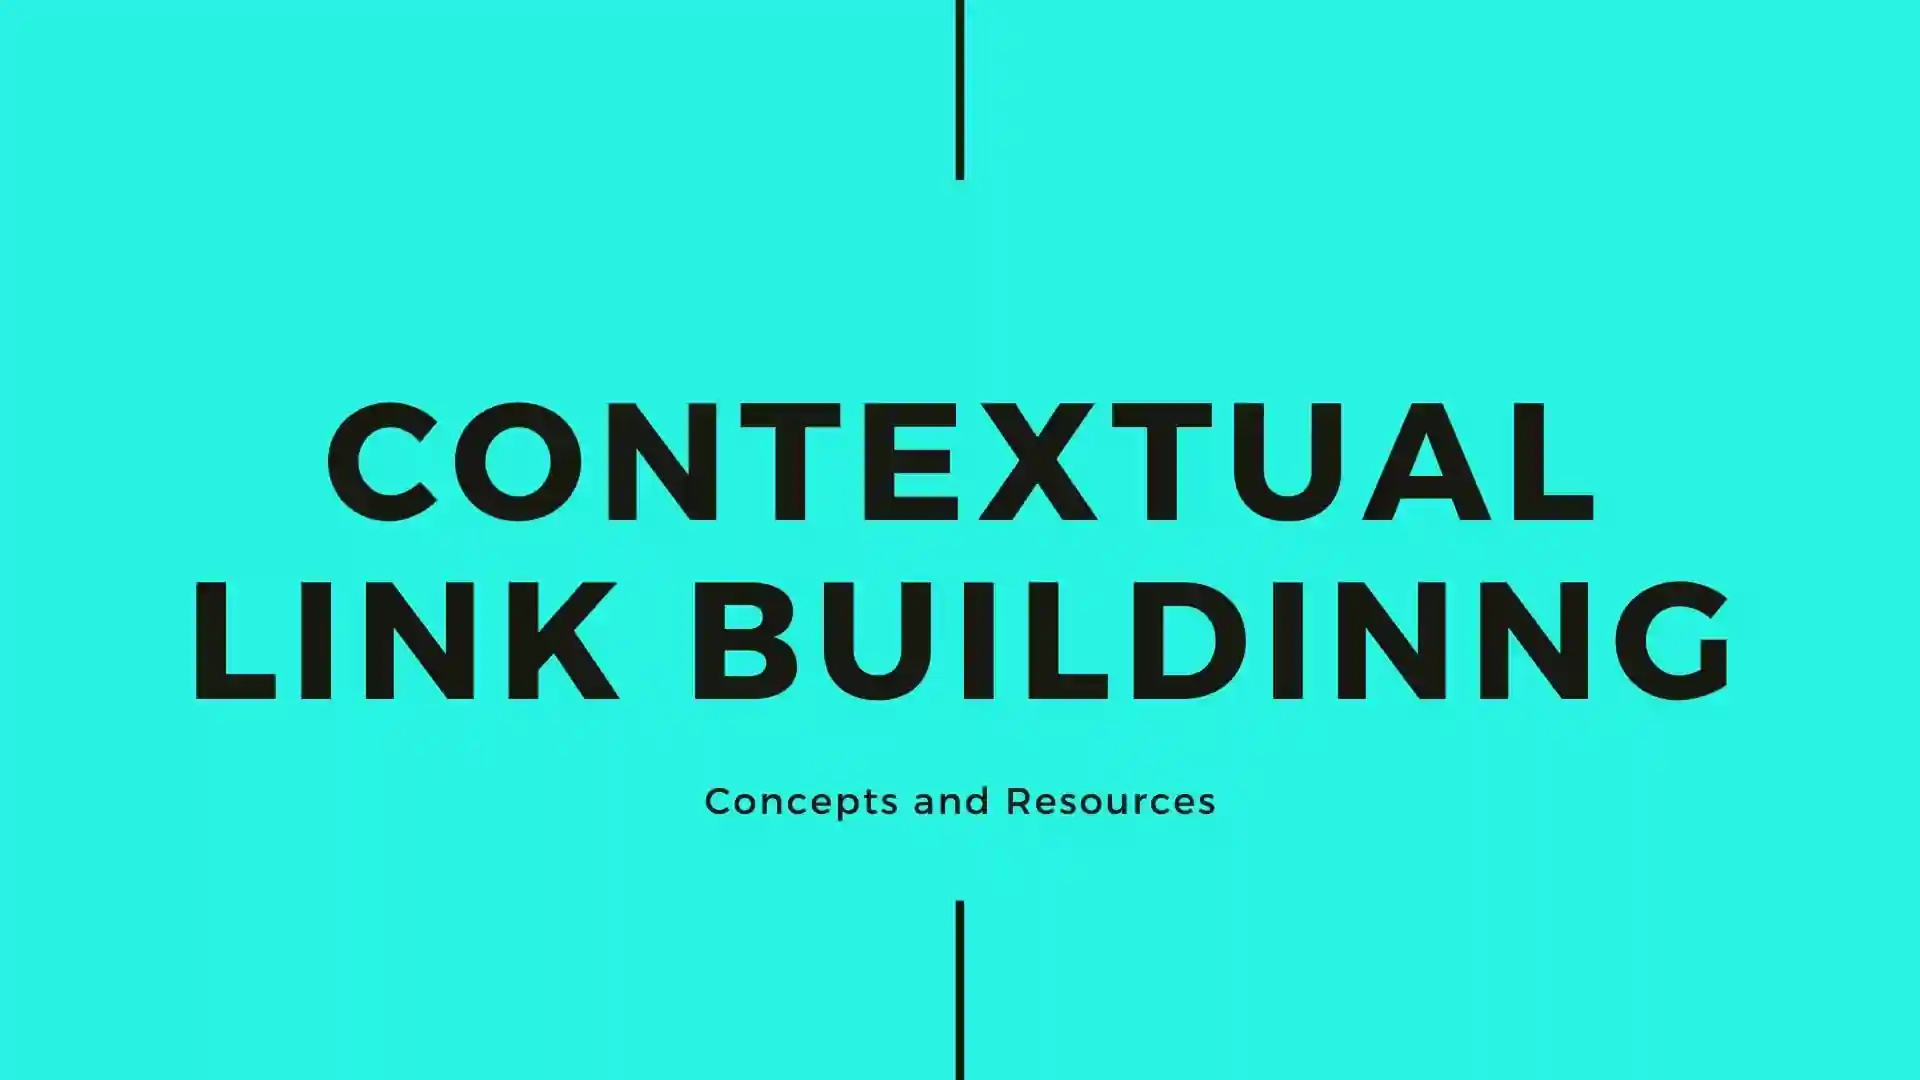 26 - Contextual Link Building Services To Promote Your Brand